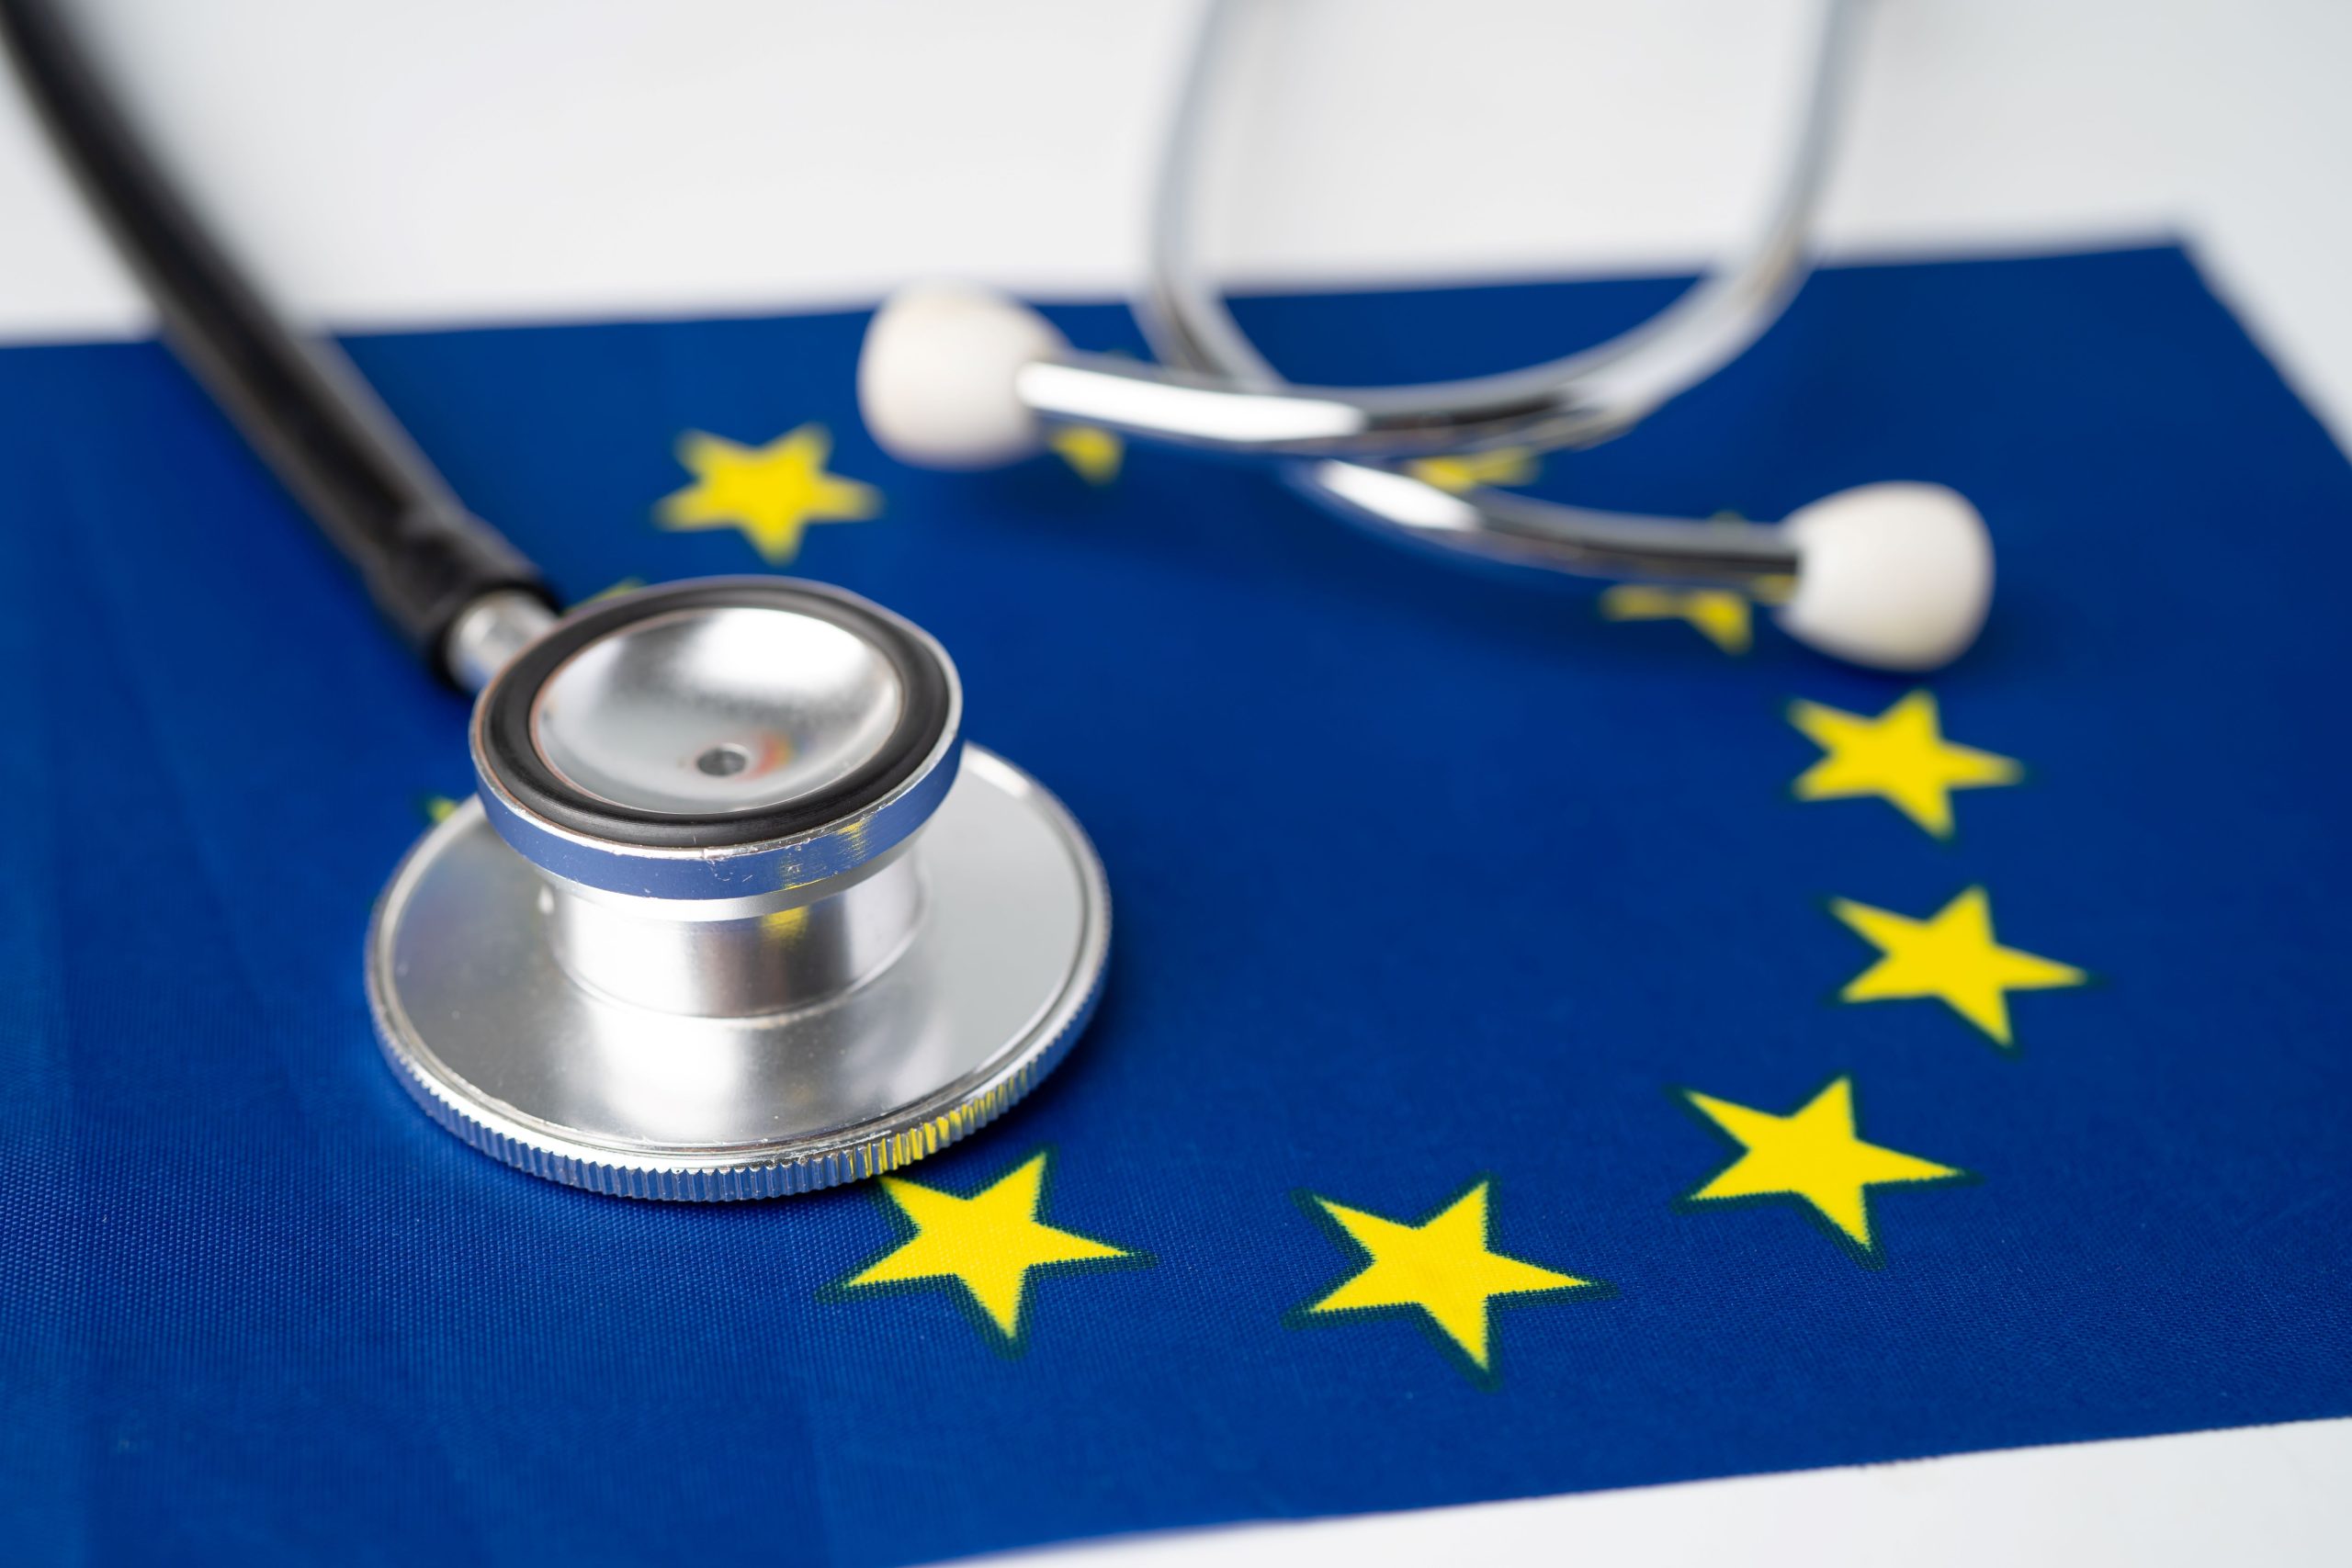 Healthcare & Pharmaceutical Business Opportunities in EU